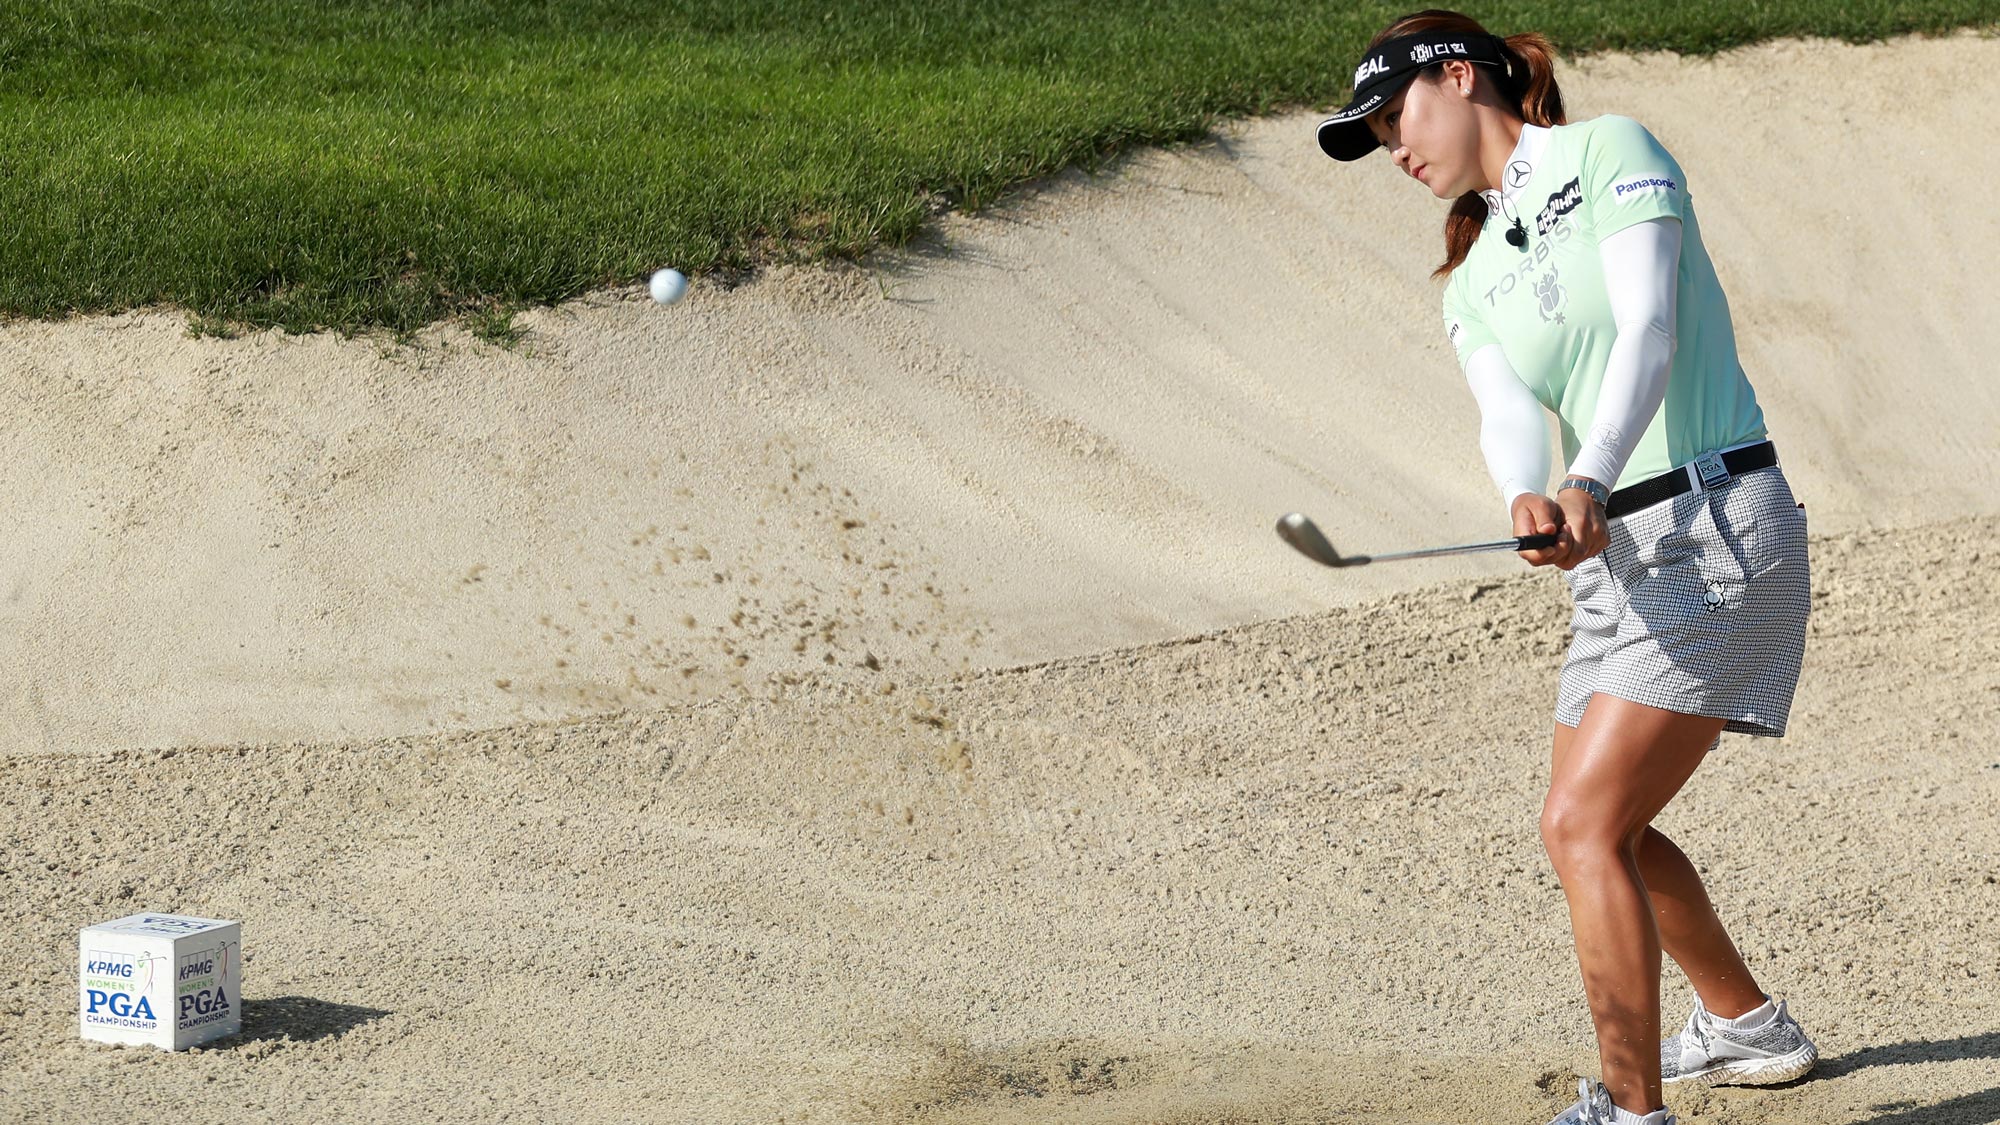 So Yeon Ryu hits a shot out of the bunker during the KPMG Skills Challenge